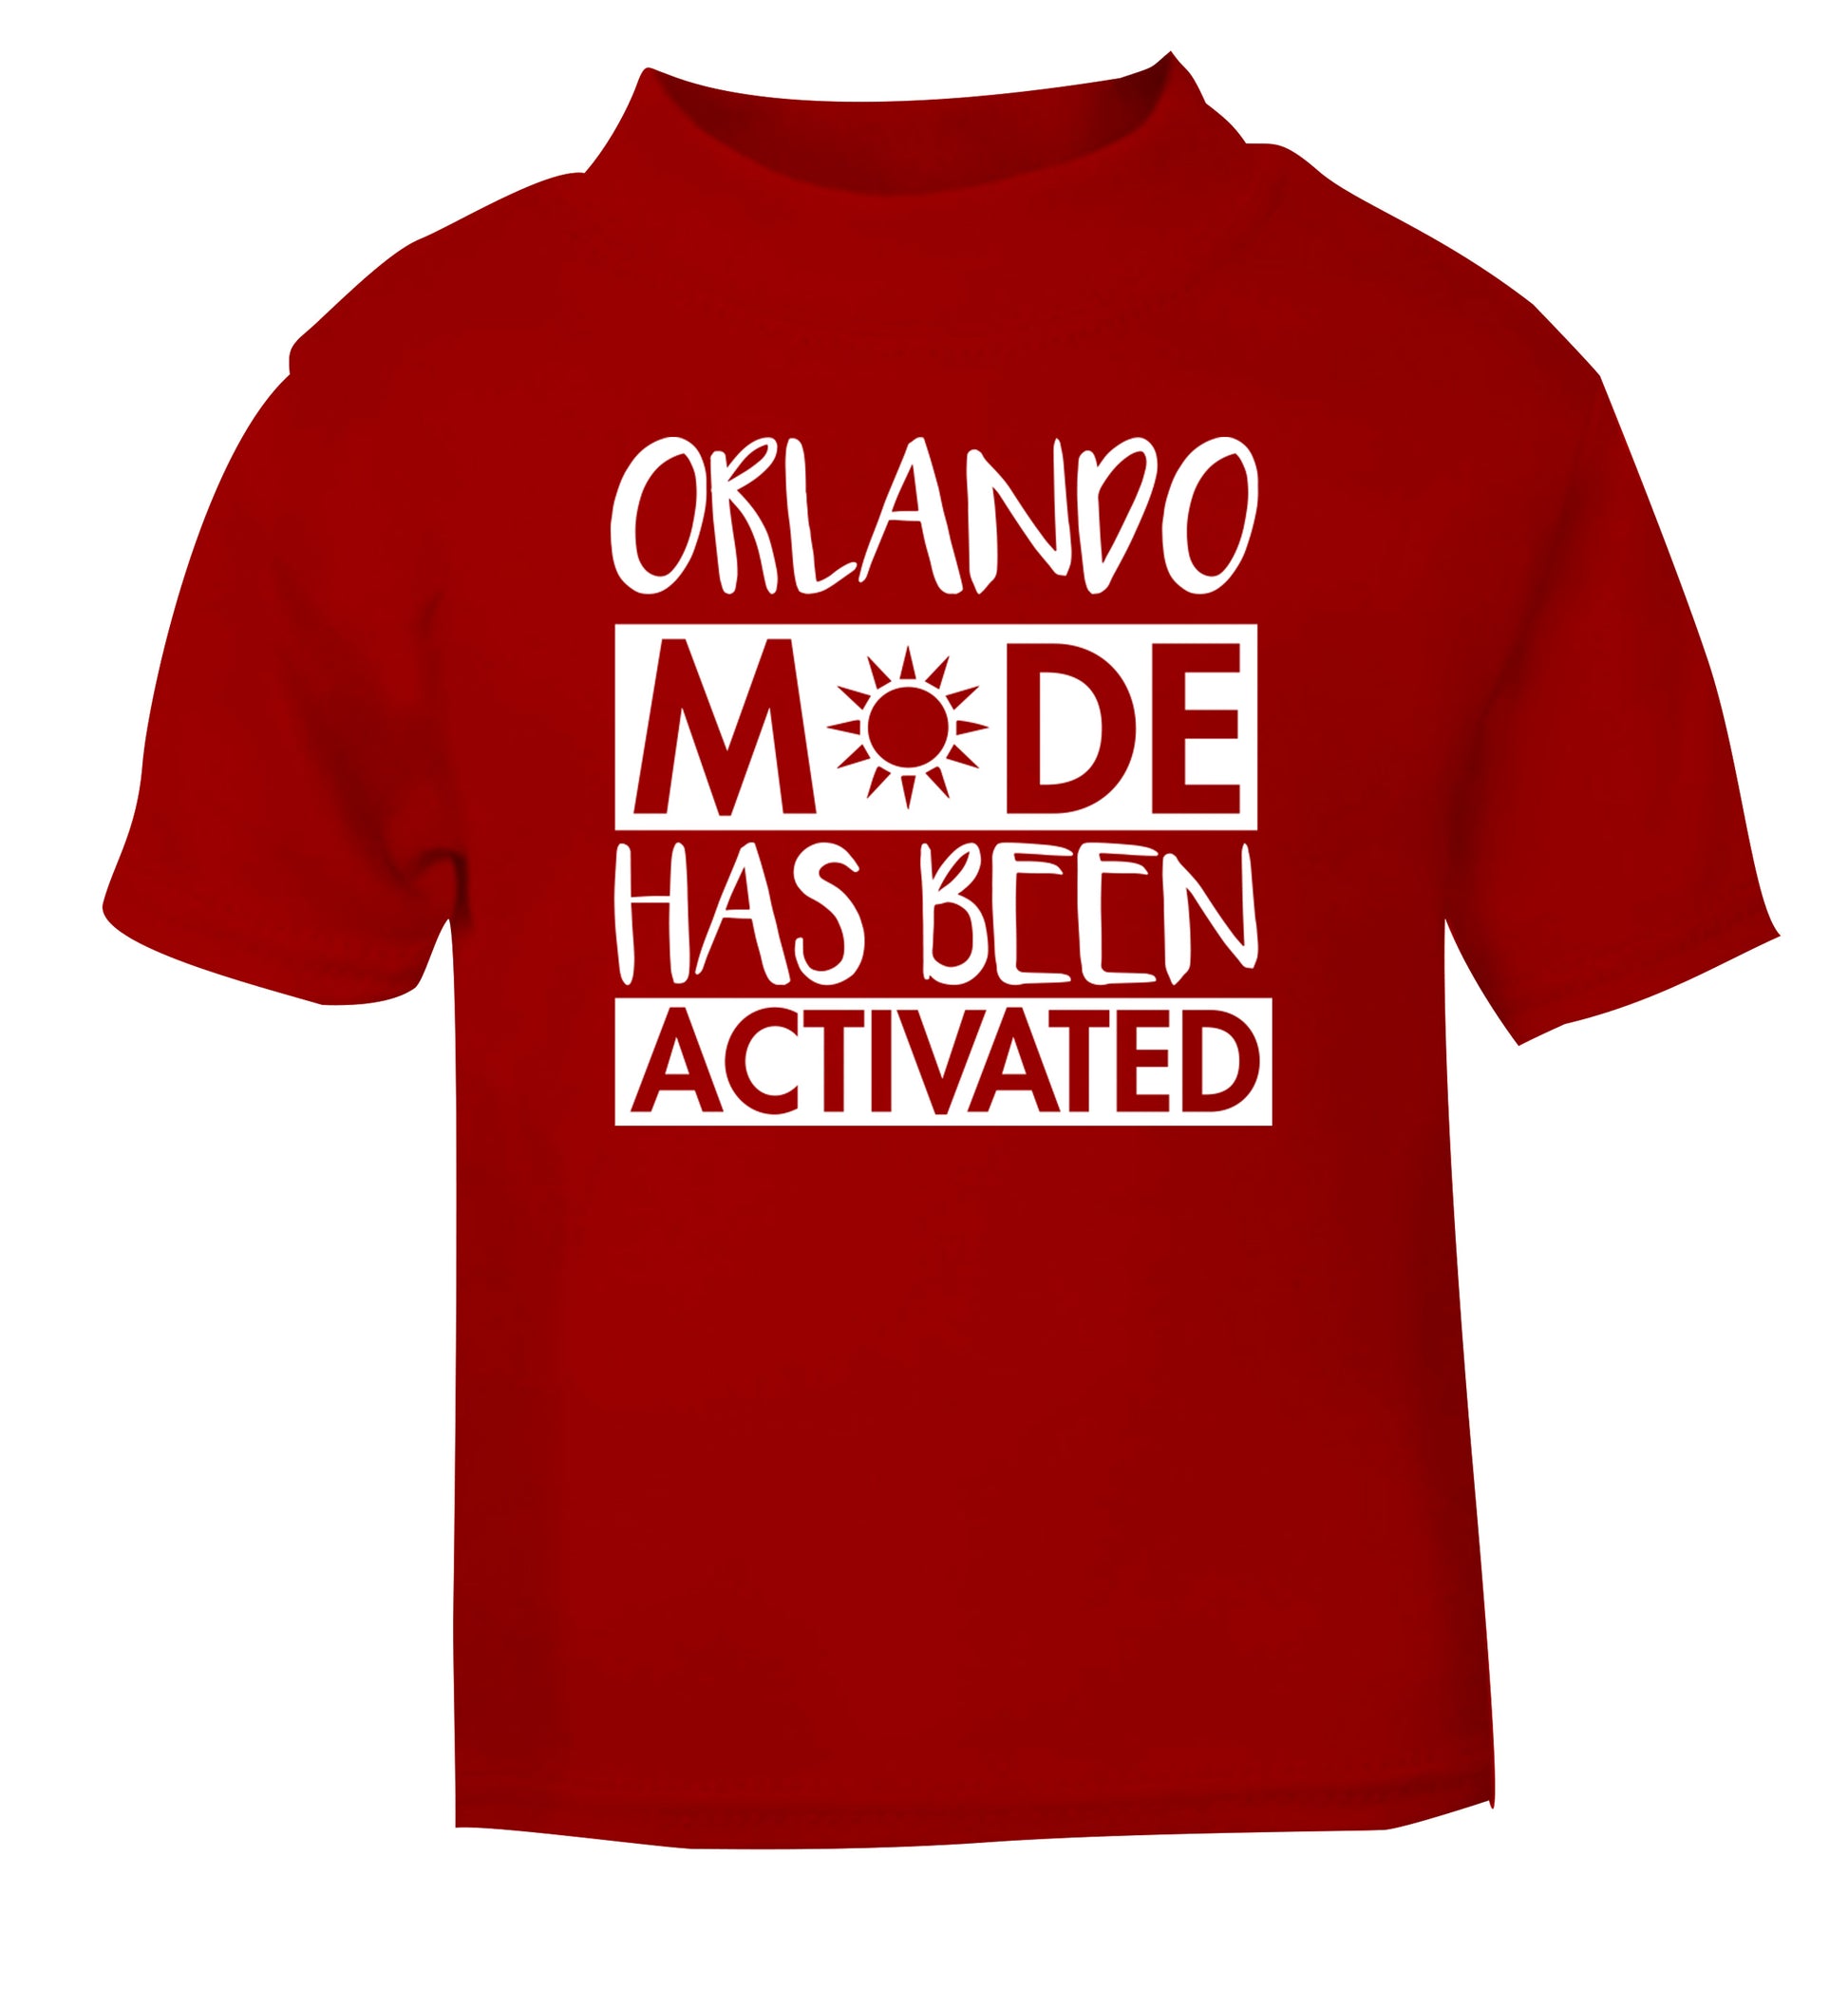 Orlando mode has been activated red Baby Toddler Tshirt 2 Years